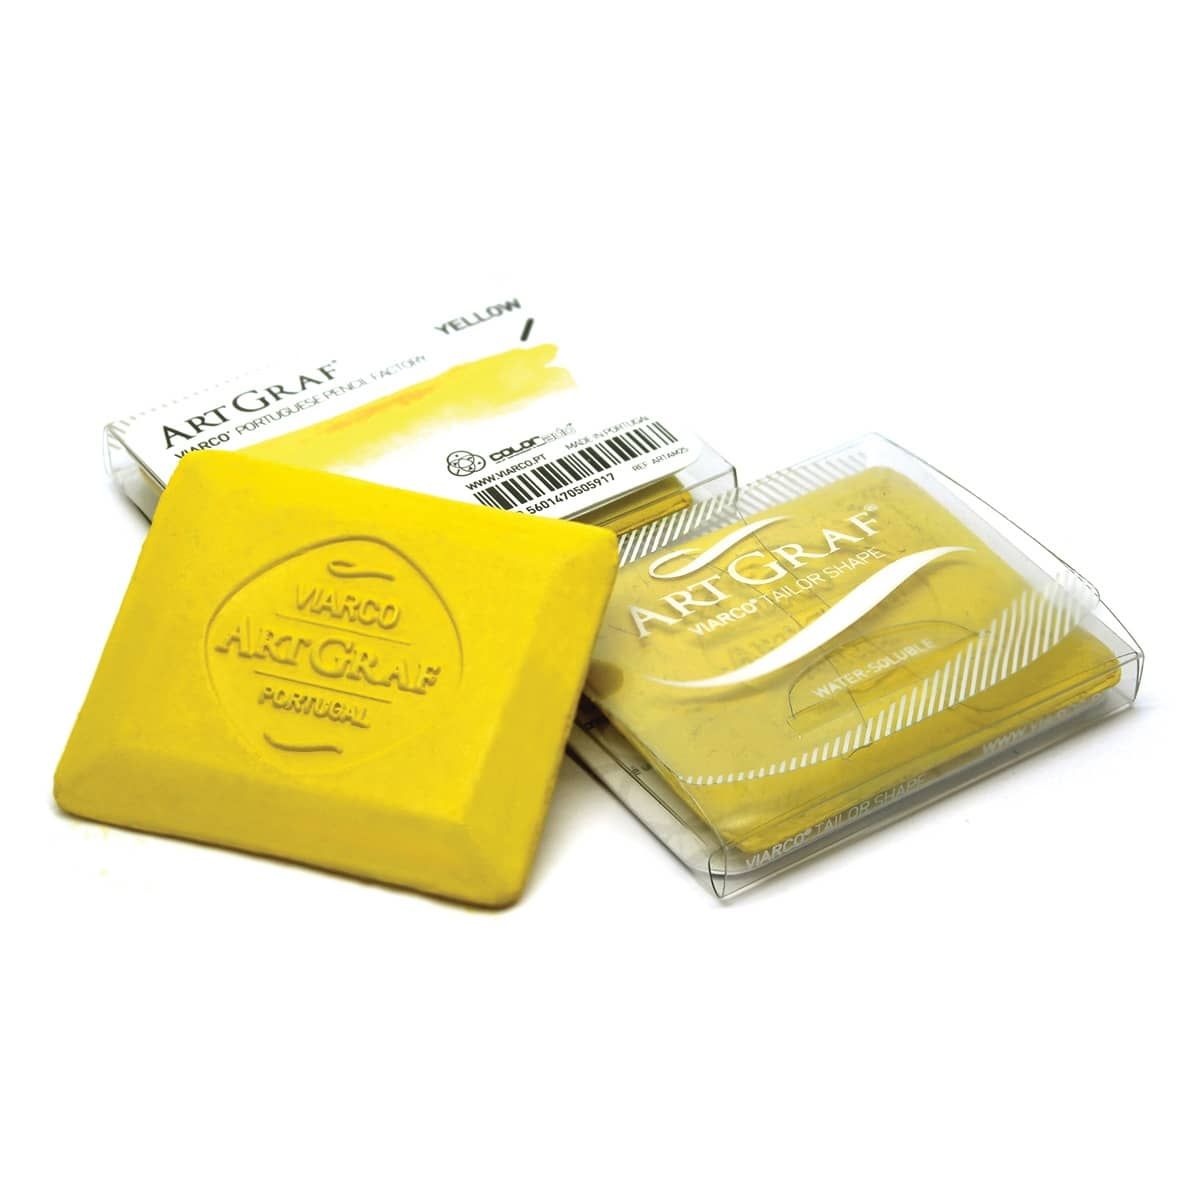 Viarco Artgraf Tailor Shape Water Soluble Pigment Yellow